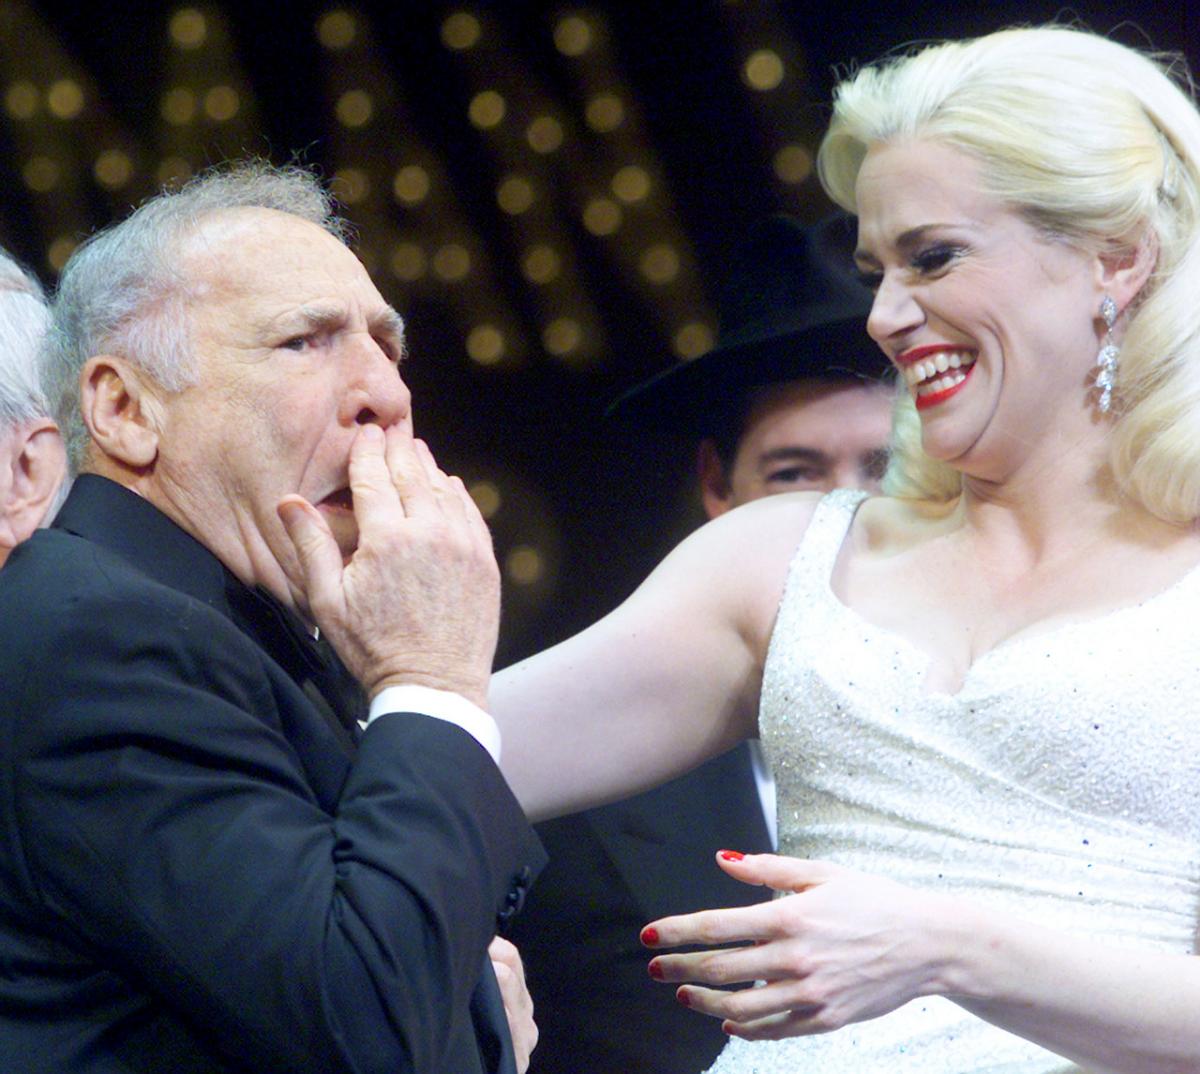 Brooks holds his hand to his face in surprise as a blonde actress in a white dress reaches out to embrace him